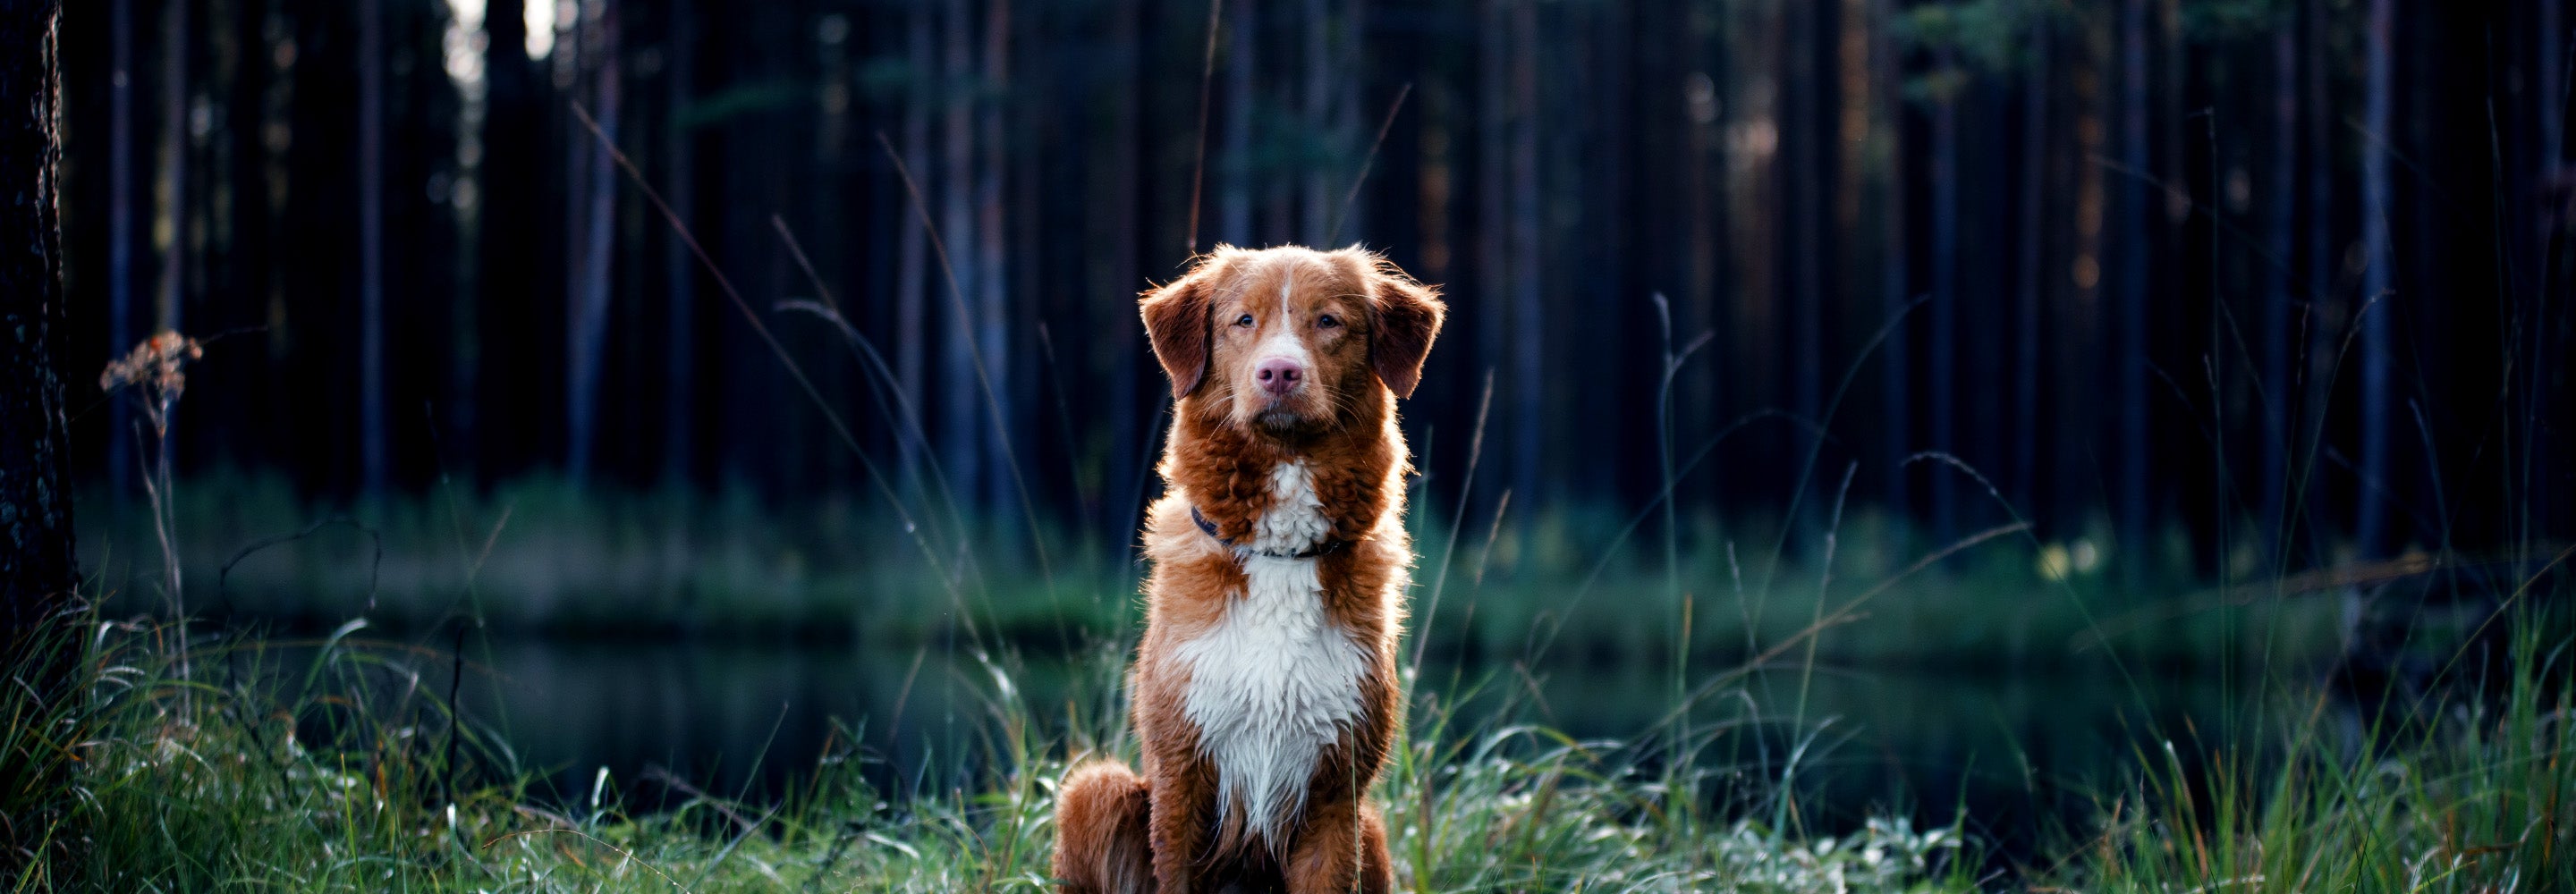 A brown and white dog sitting in front of a dark blurred green and brown forest background with a lake.